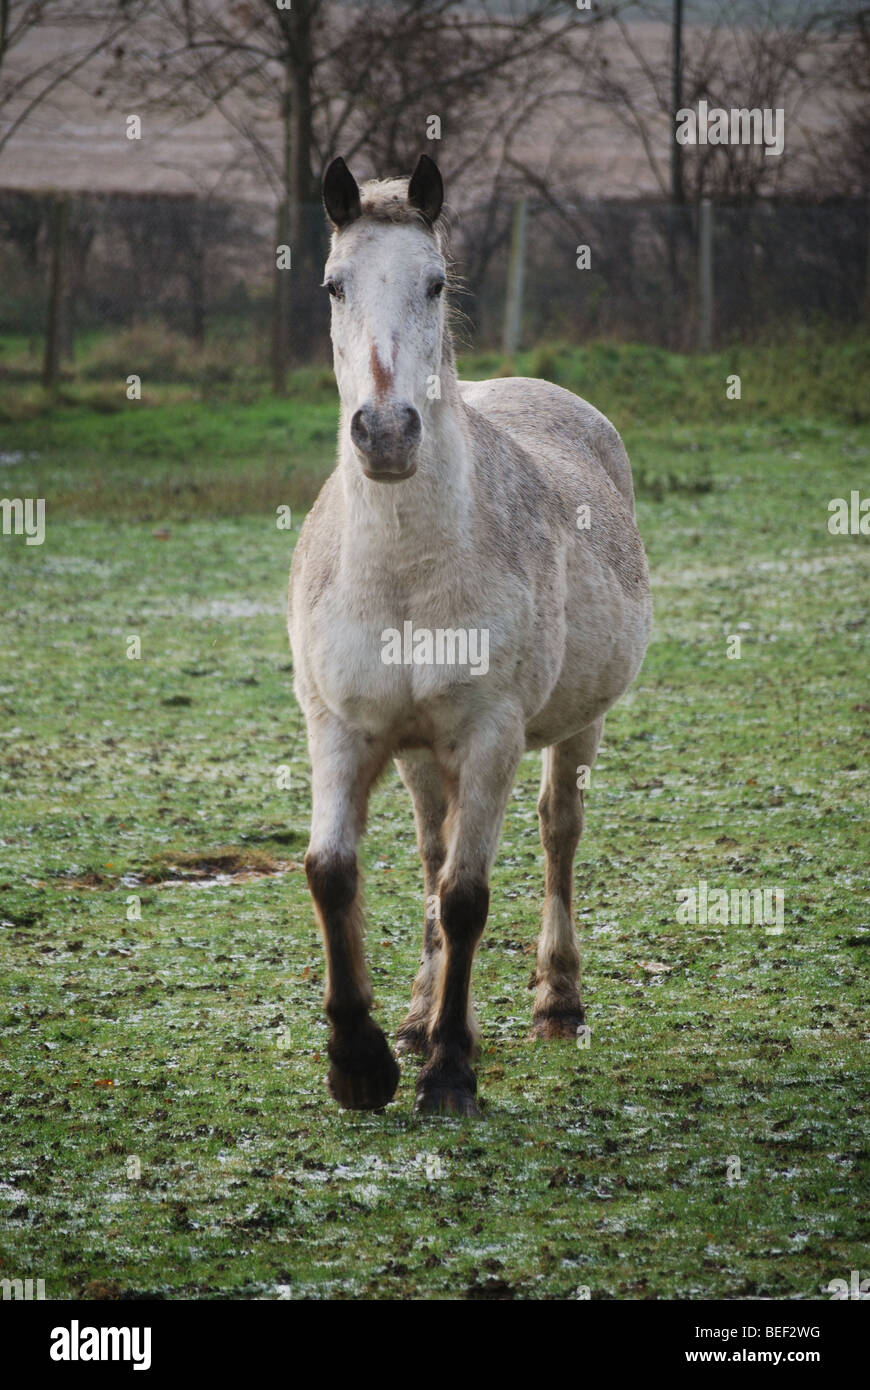 White horse walking ears pricked up Stock Photo